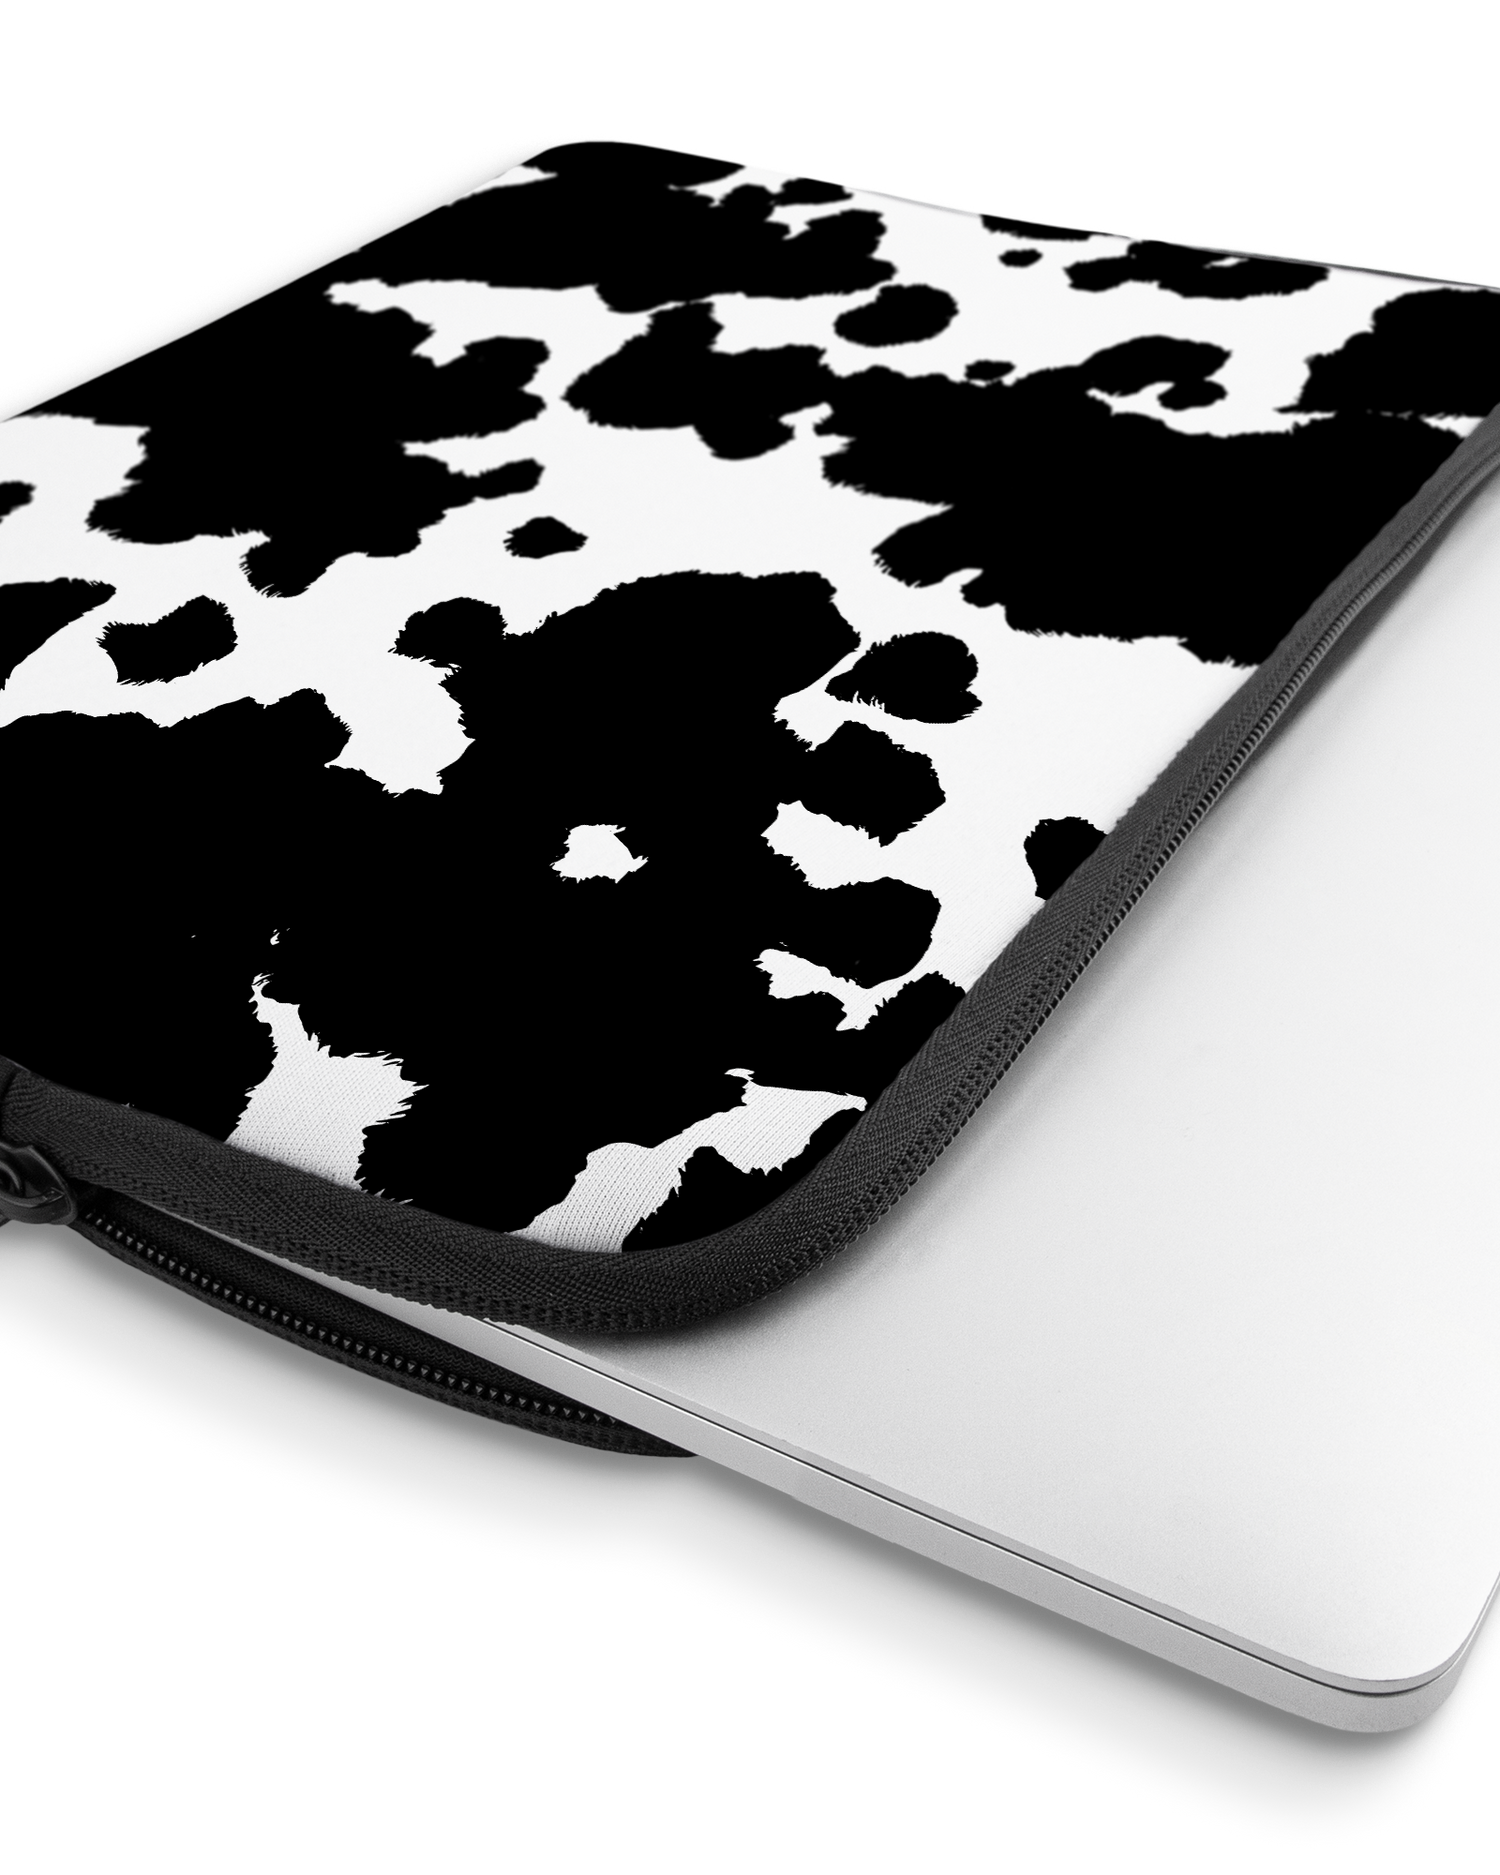 Cow Print Laptop Case 13 inch with device inside